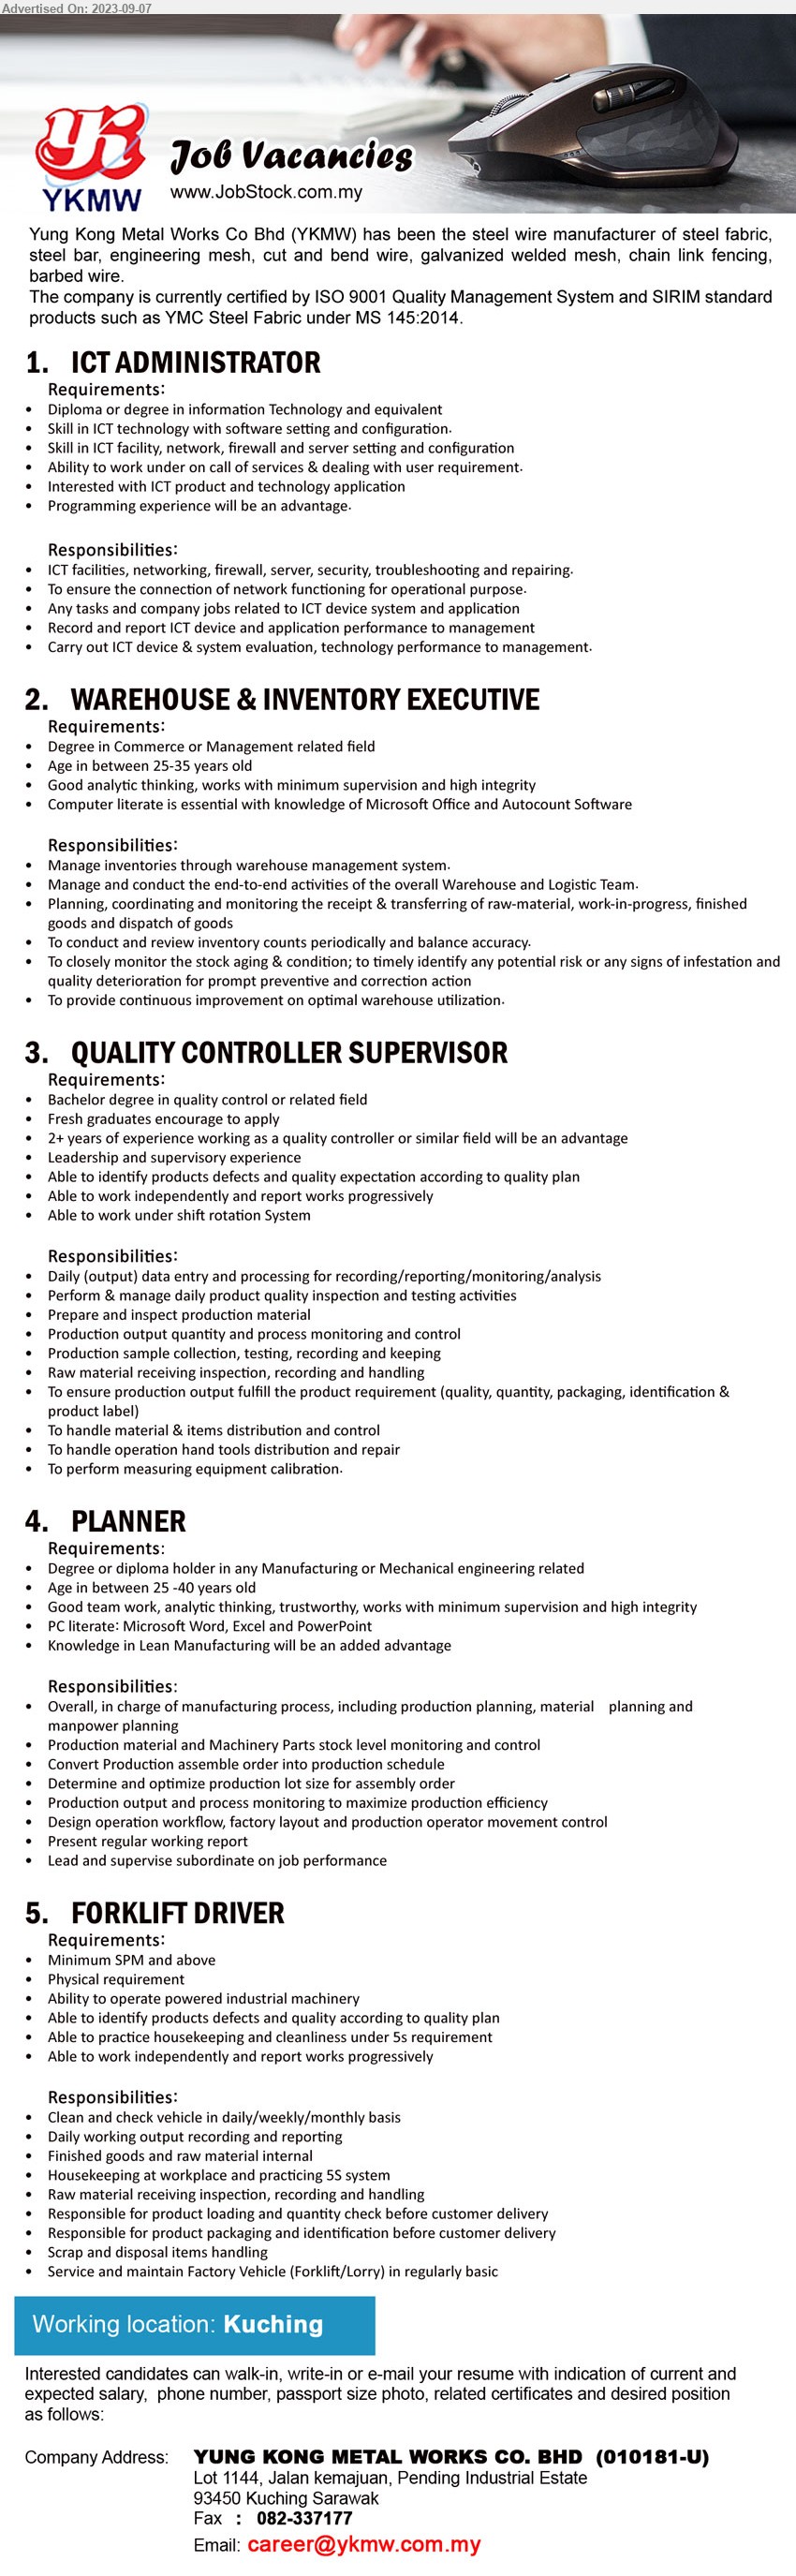 YUNG KONG METAL WORKS CO BHD - 1. ICT ADMINISTRATOR  (Kuching), Diploma or Degree in Information Technology, Skill in ICT technology with software setting and configuration.,...
2. WAREHOUSE & INVENTORY EXECUTIVE (Kuching), Degree in Commerce or Management ,...
3. QUALITY CONTROLLER SUPERVISOR (Kuching), Bachelor degree in quality control ,...
4. PLANNER (Kuching), Degree or Diploma holder in any Manufacturing or Mechanical engineering ,...
5. FORKLIFT DRIVER  (Kuching), SPM, Ability to operate powered industrial machinery,...
Email resume to ...